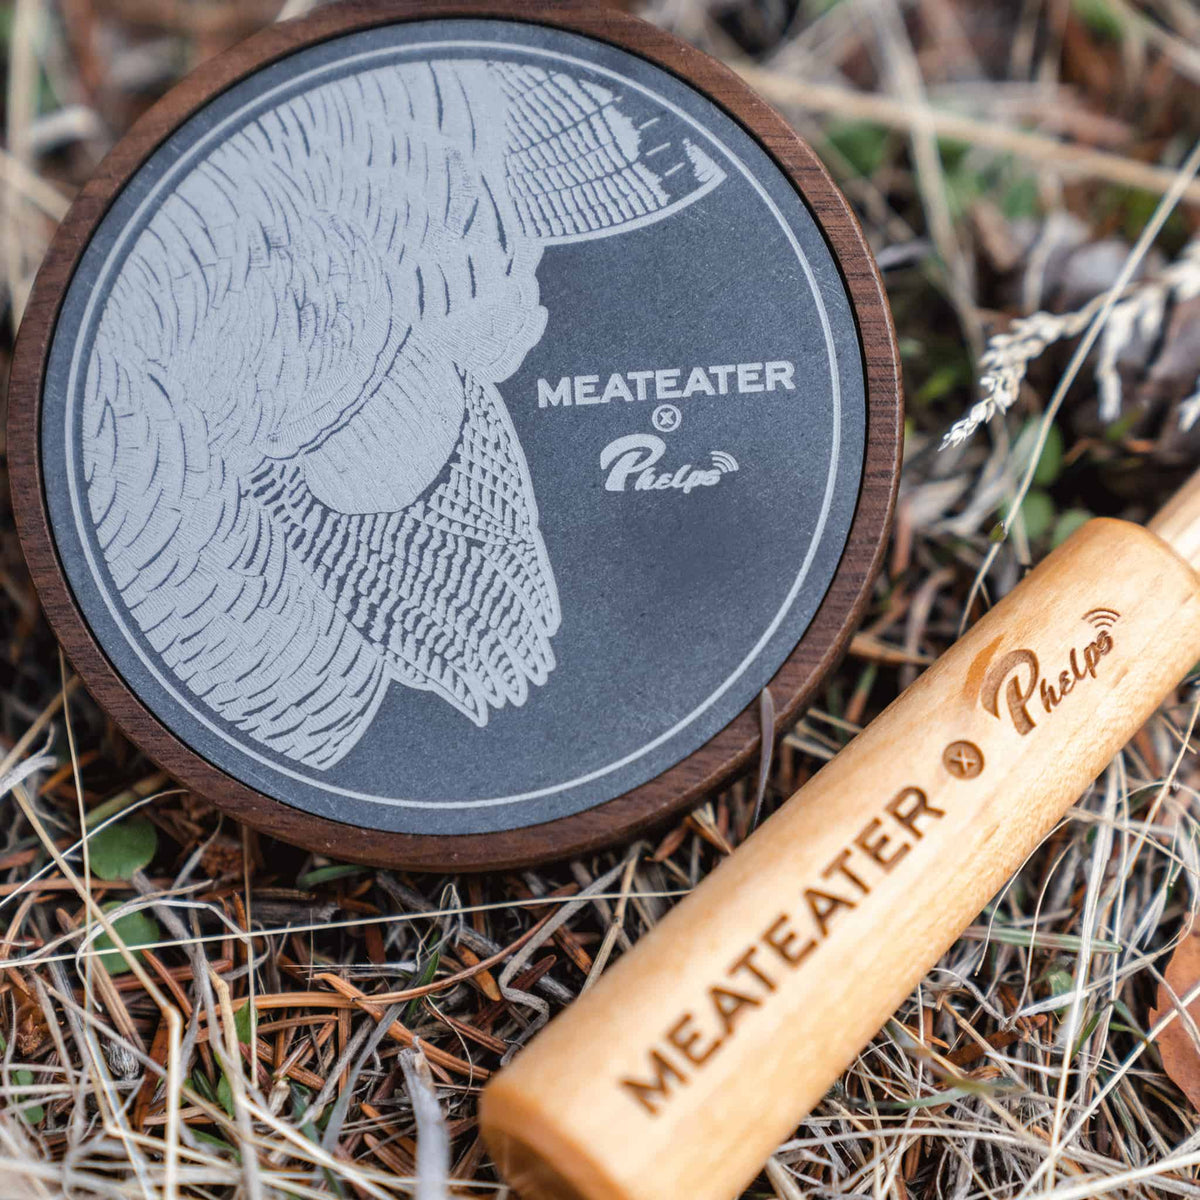  851182007550 meateater x phelps game calls slate over glass turkey pot call In the wild